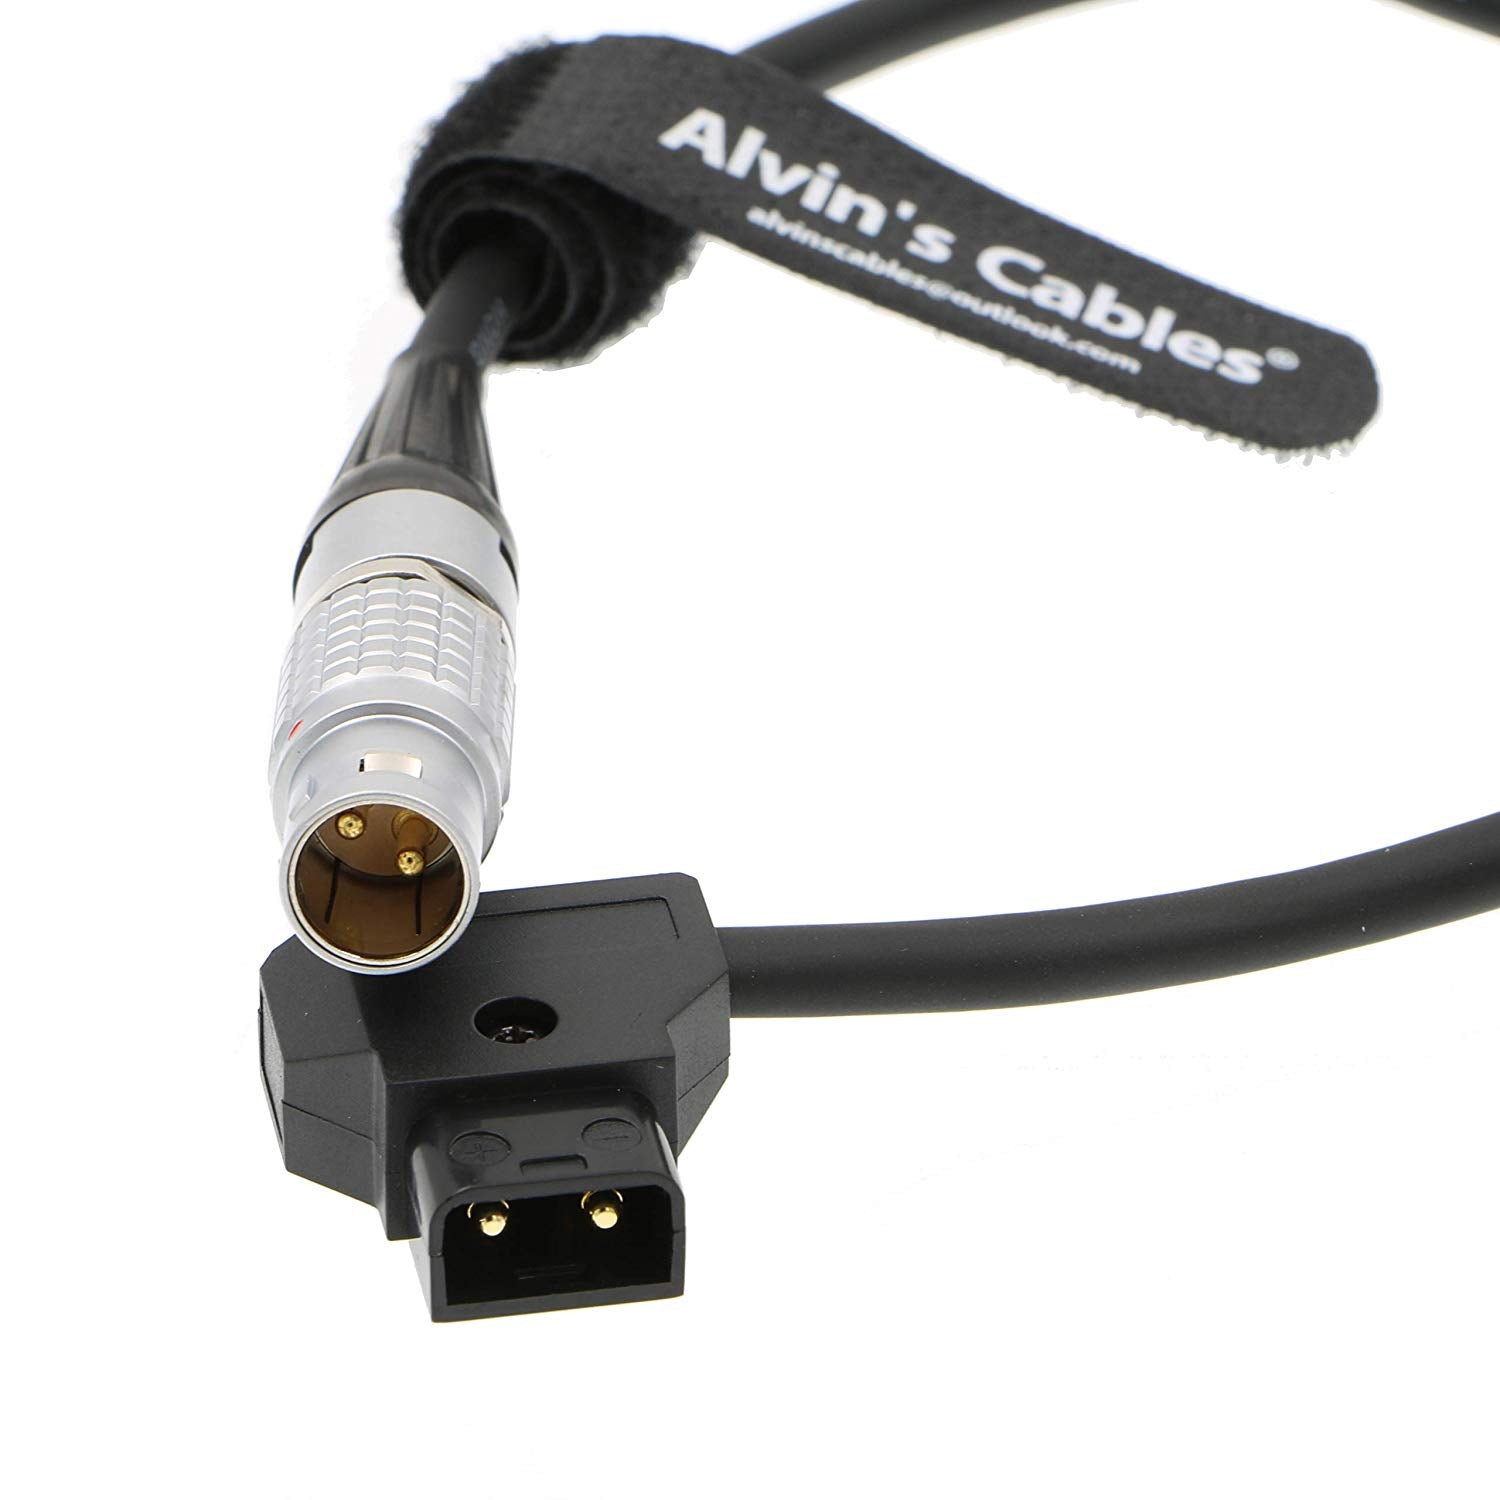 Alvin's Cables MOVI PRO Power Adapter Cable 2 Pin Male to D-tap